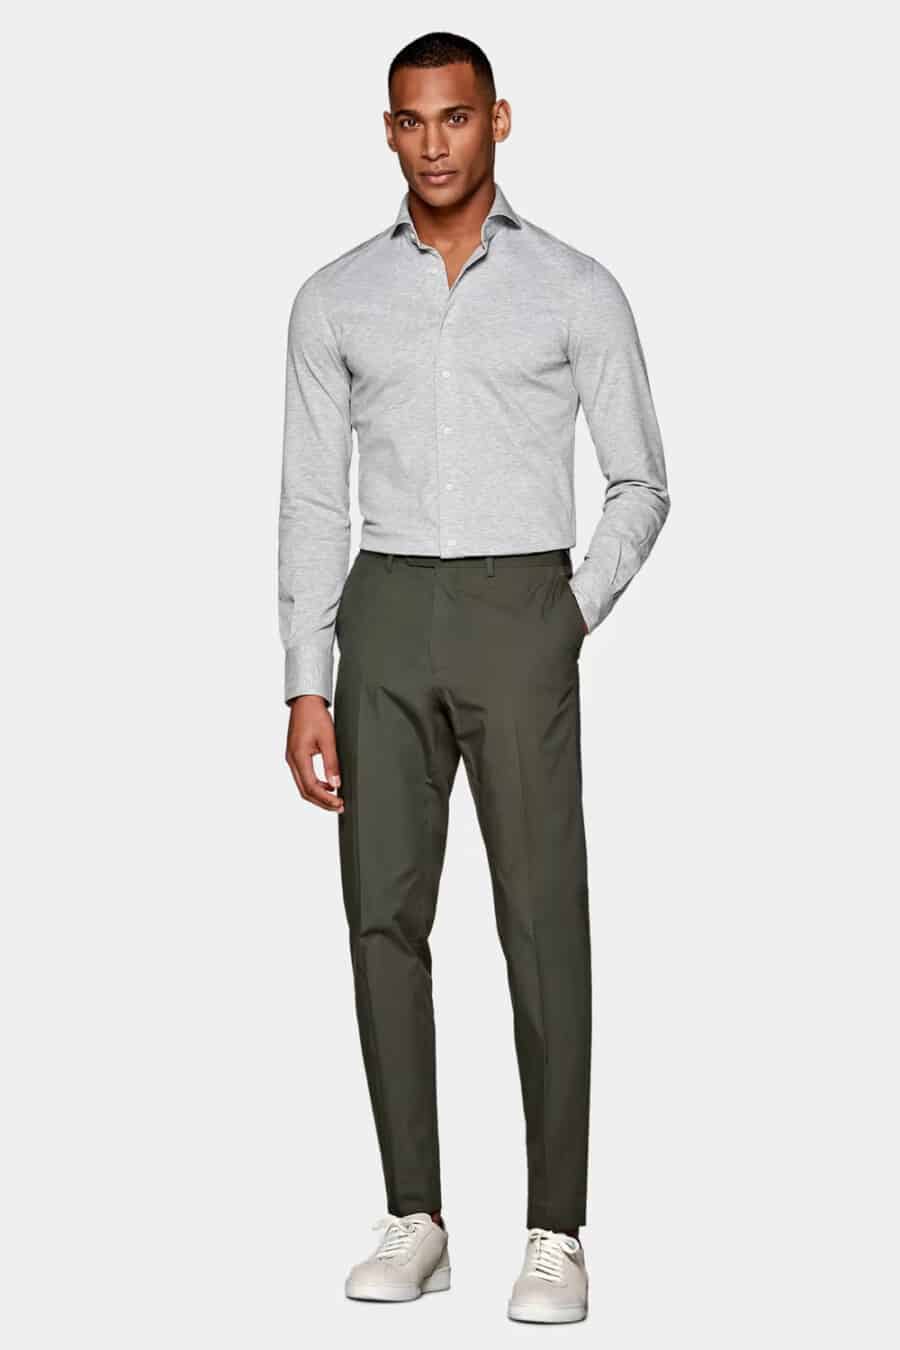 Men's dark green tailored pants, light grey jersey shirt and off-white sneakers outfit